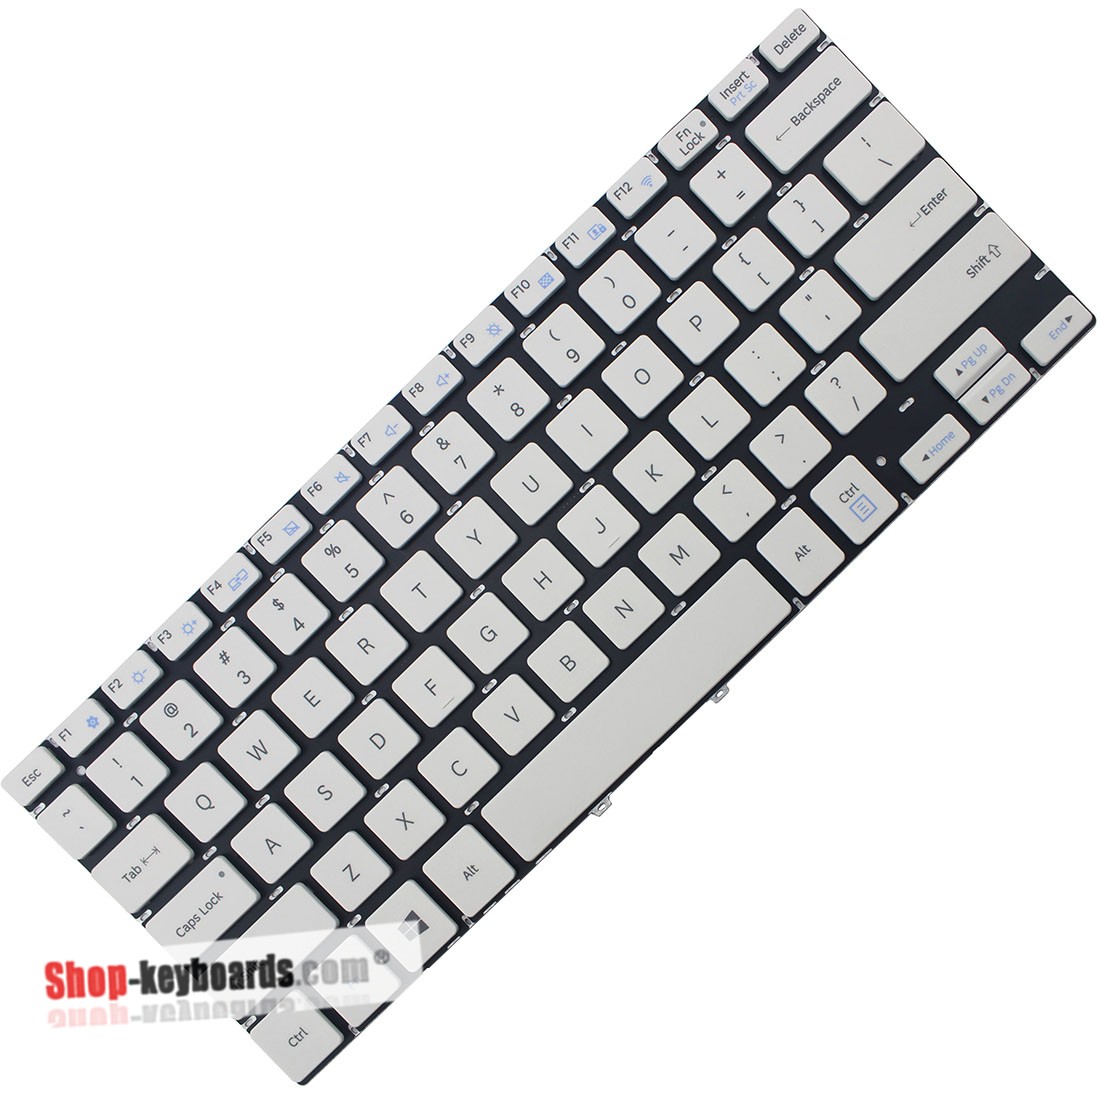 Samsung NSK-MT1SN Keyboard replacement